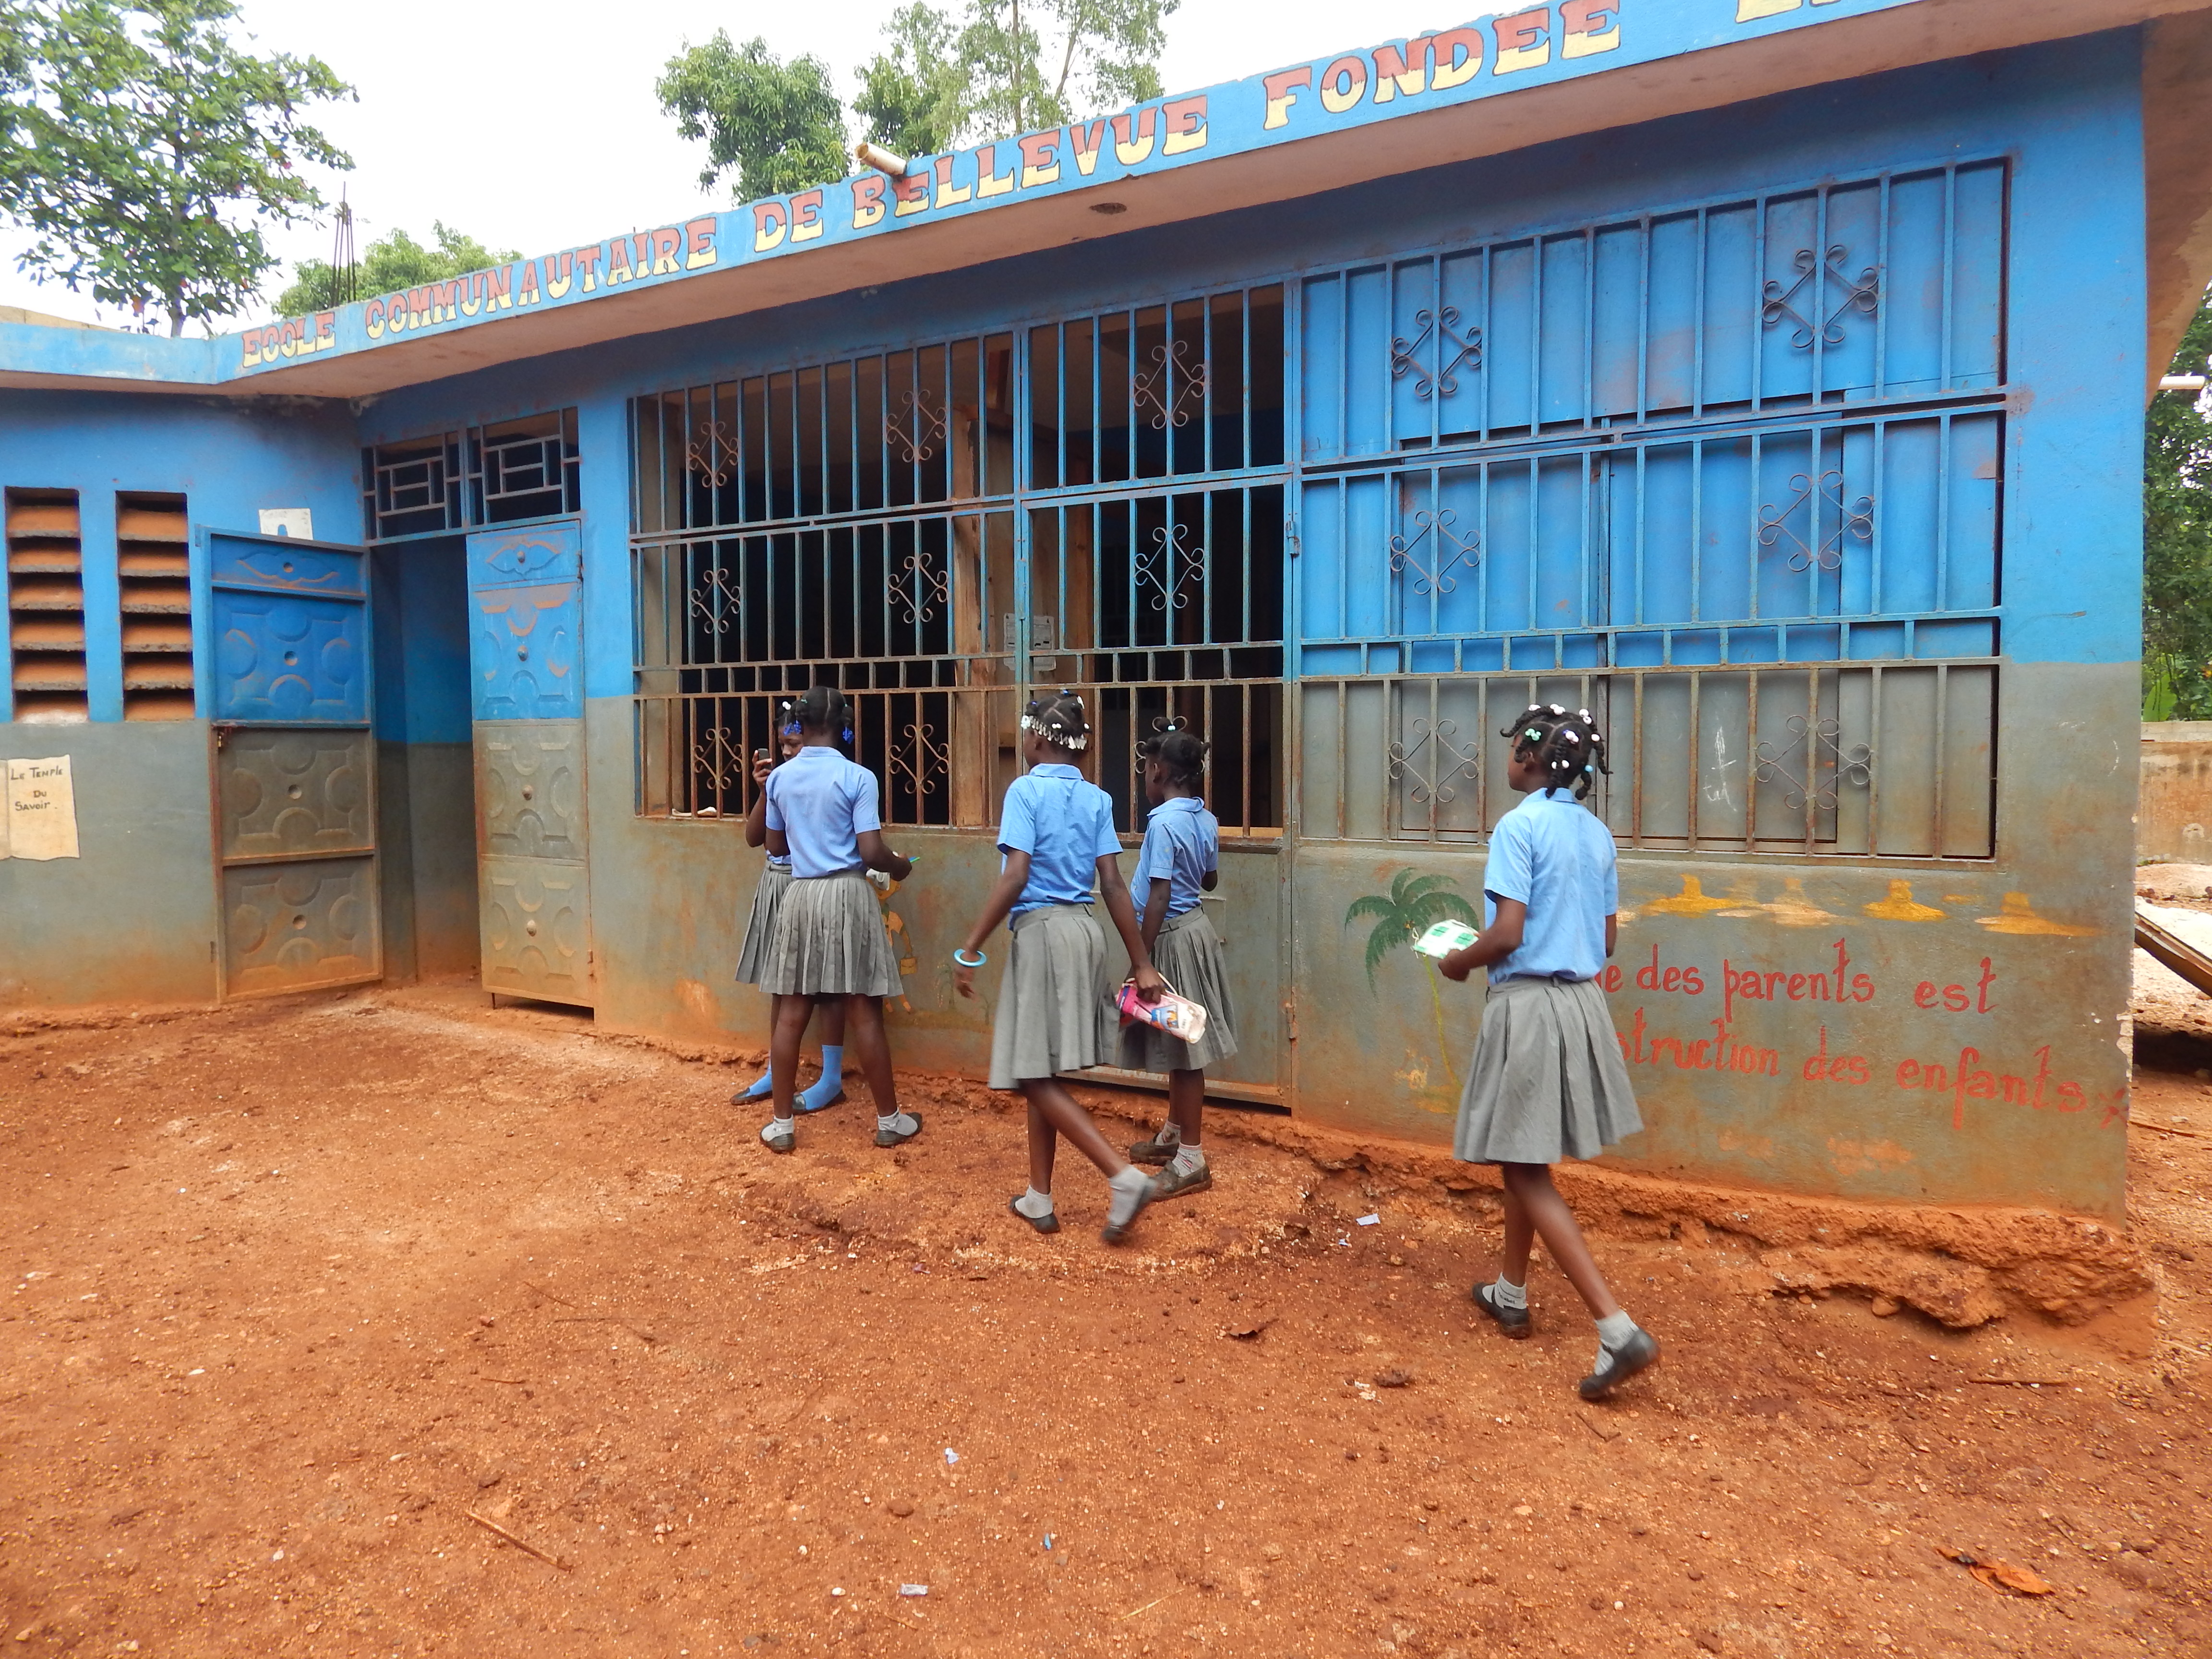 Today we have a building with 7 classrooms and an office. We are working towards adding more space and a playground